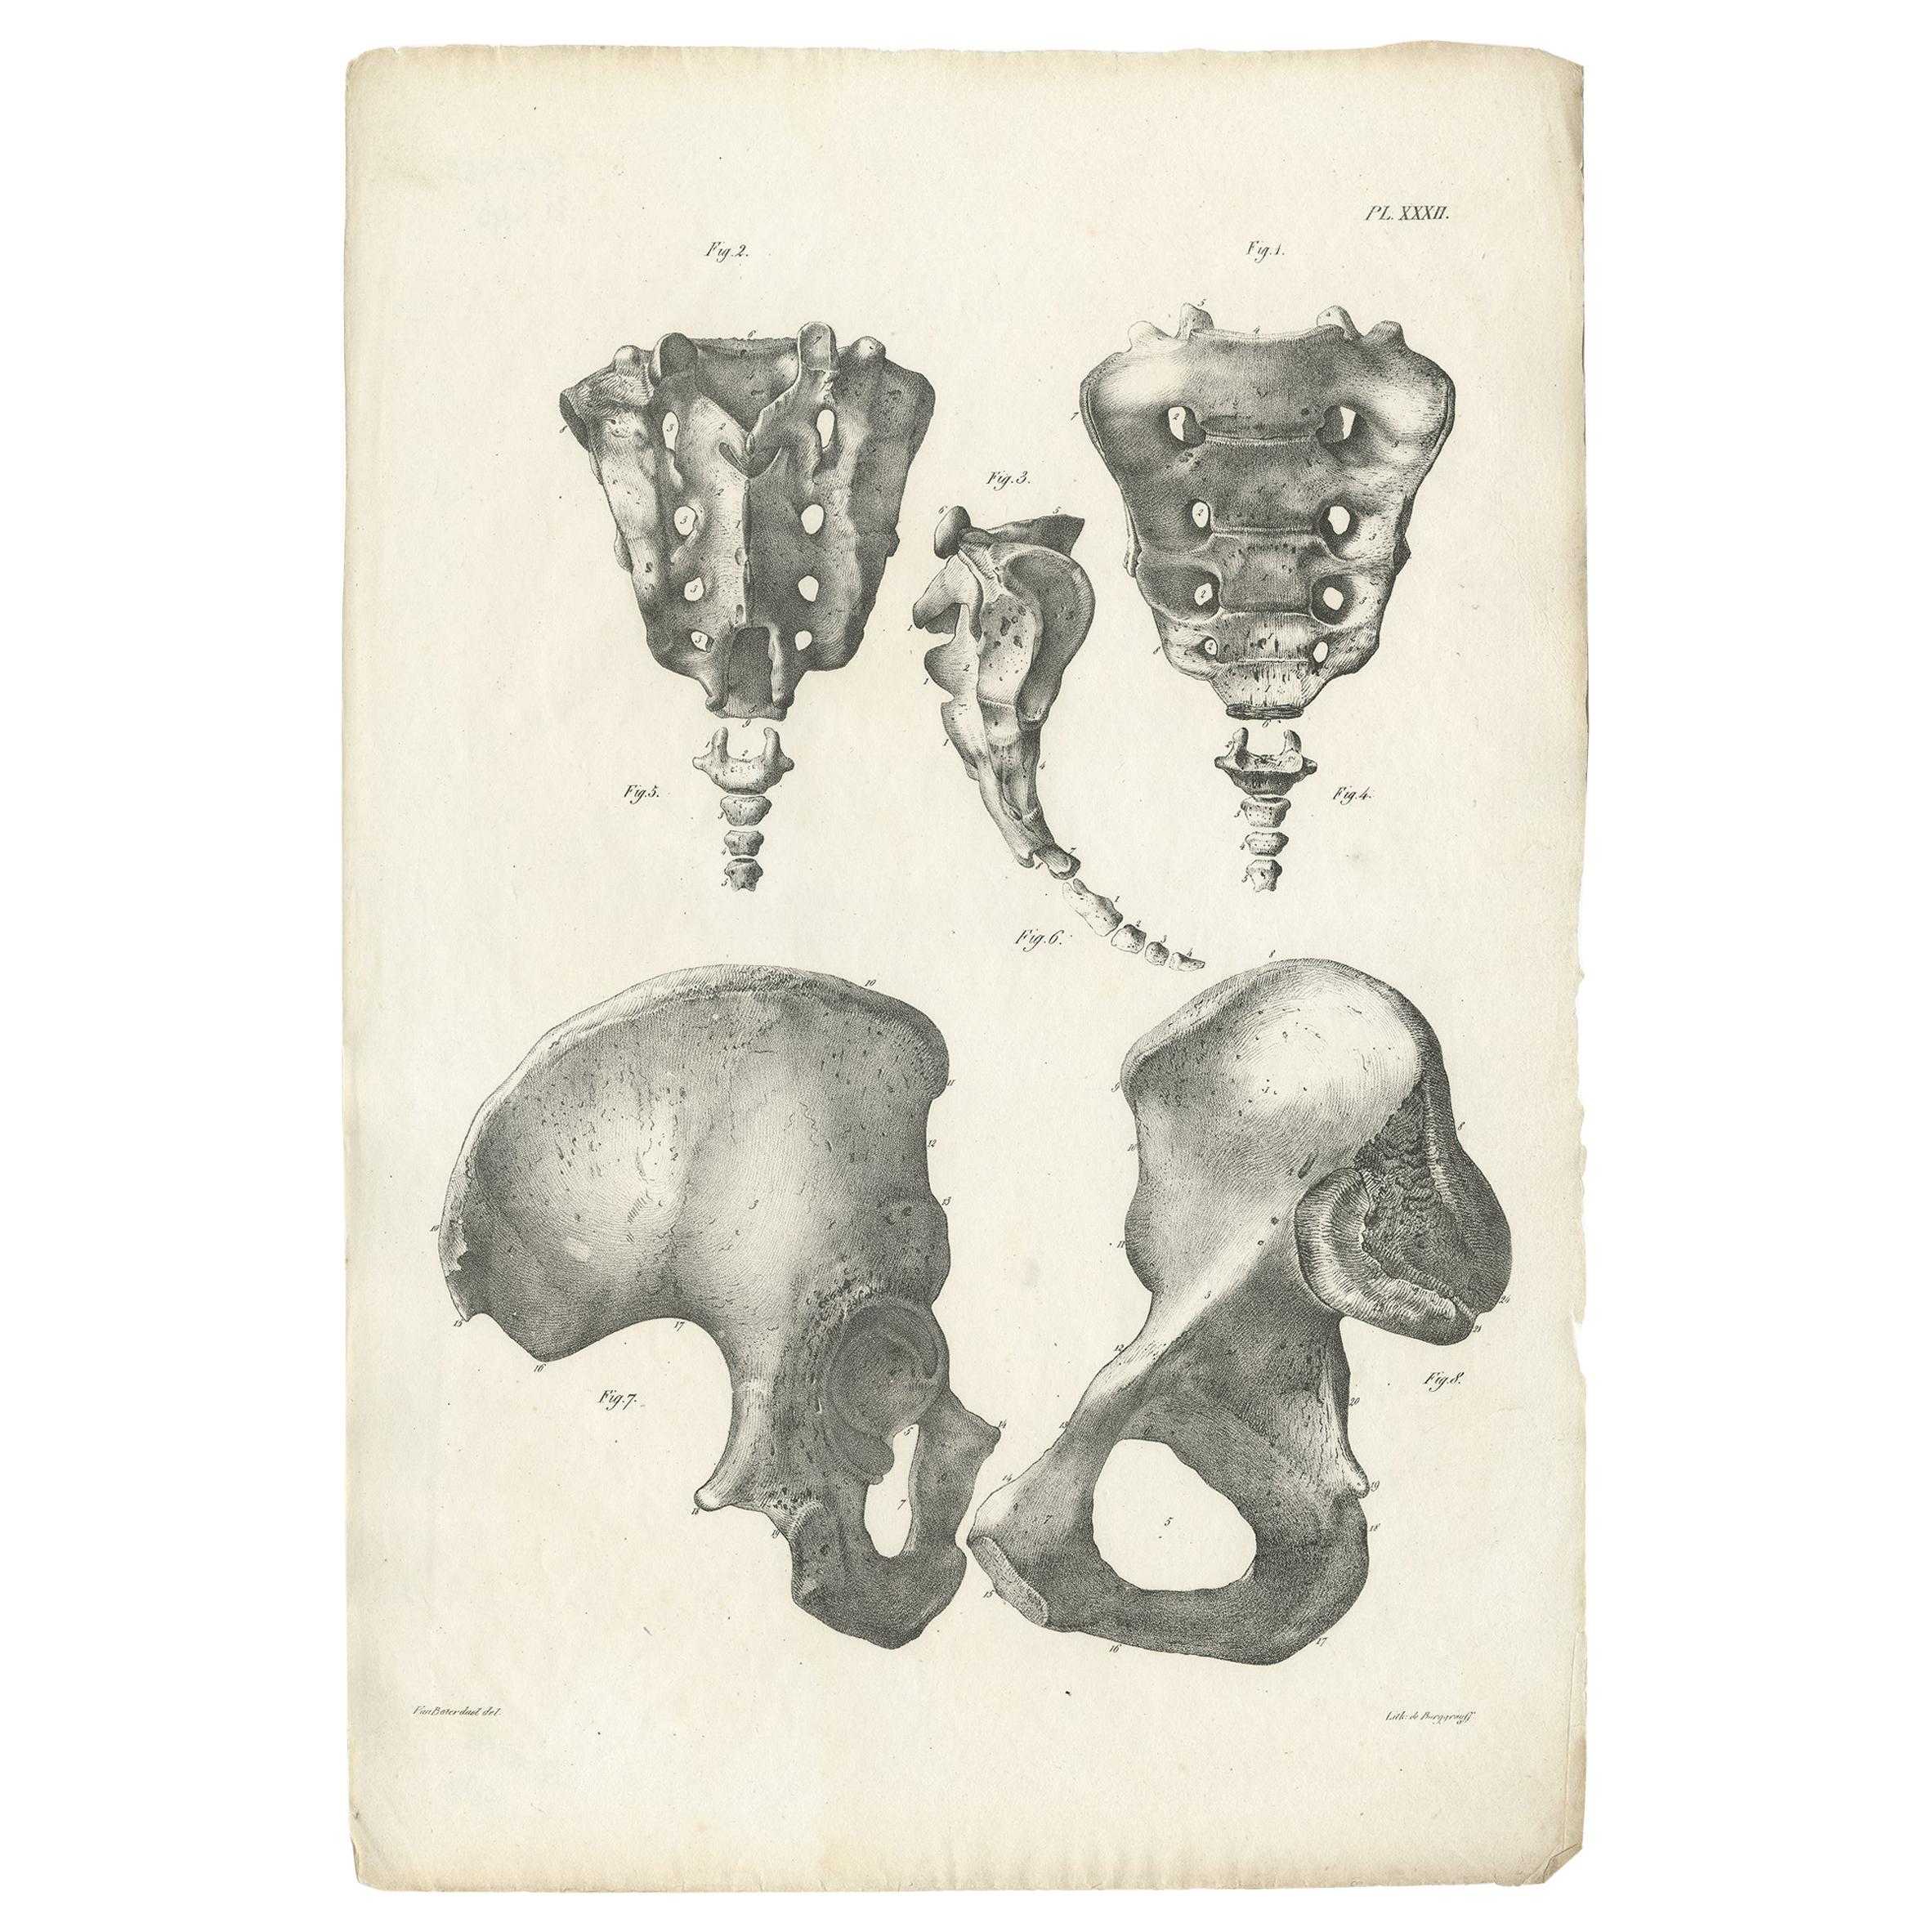 Pl. XXXII Antique Anatomy / Medical Print of the Pelvis by Cloquet, 1821 For Sale